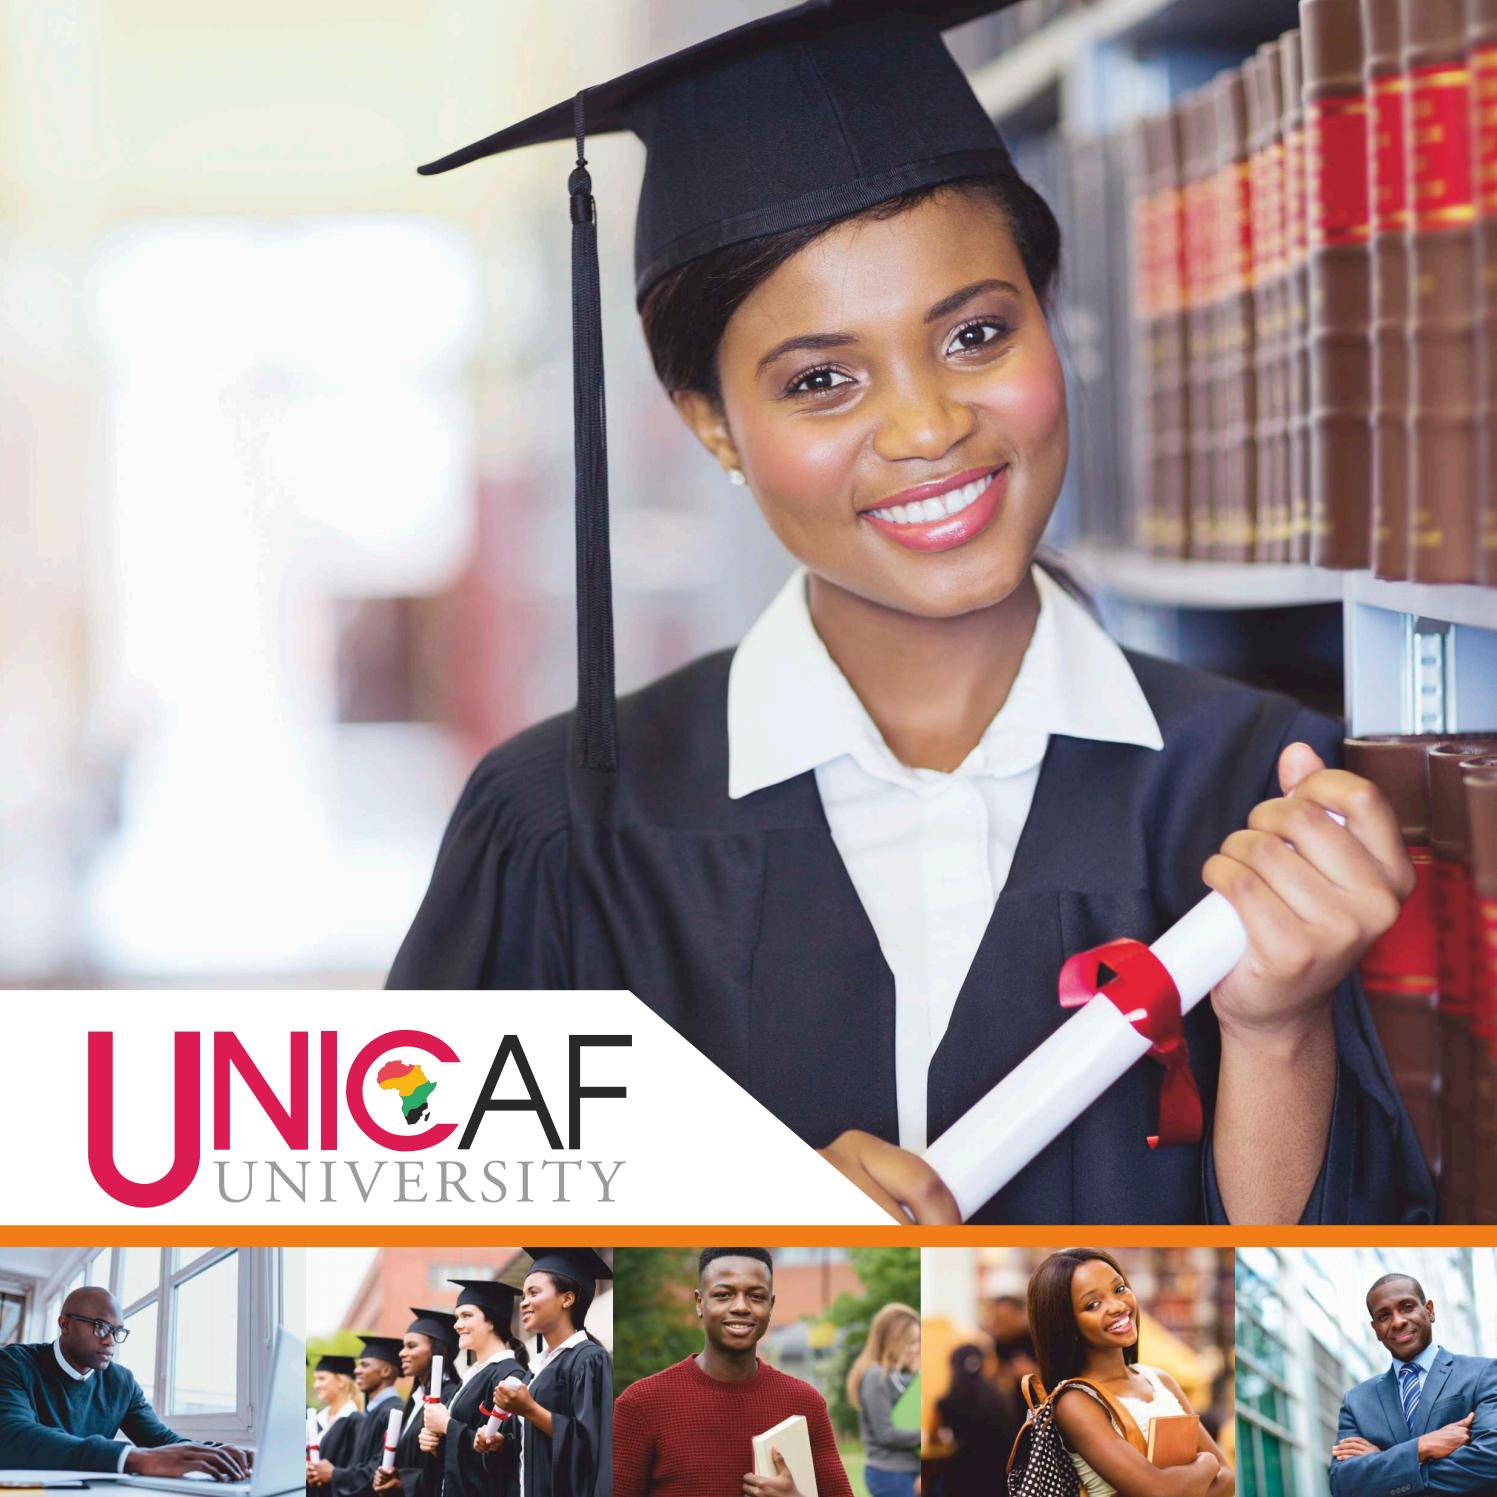 Unicaf $5 Million Worth Of Scholarships, A Golden Opportunity For Nigerian Students